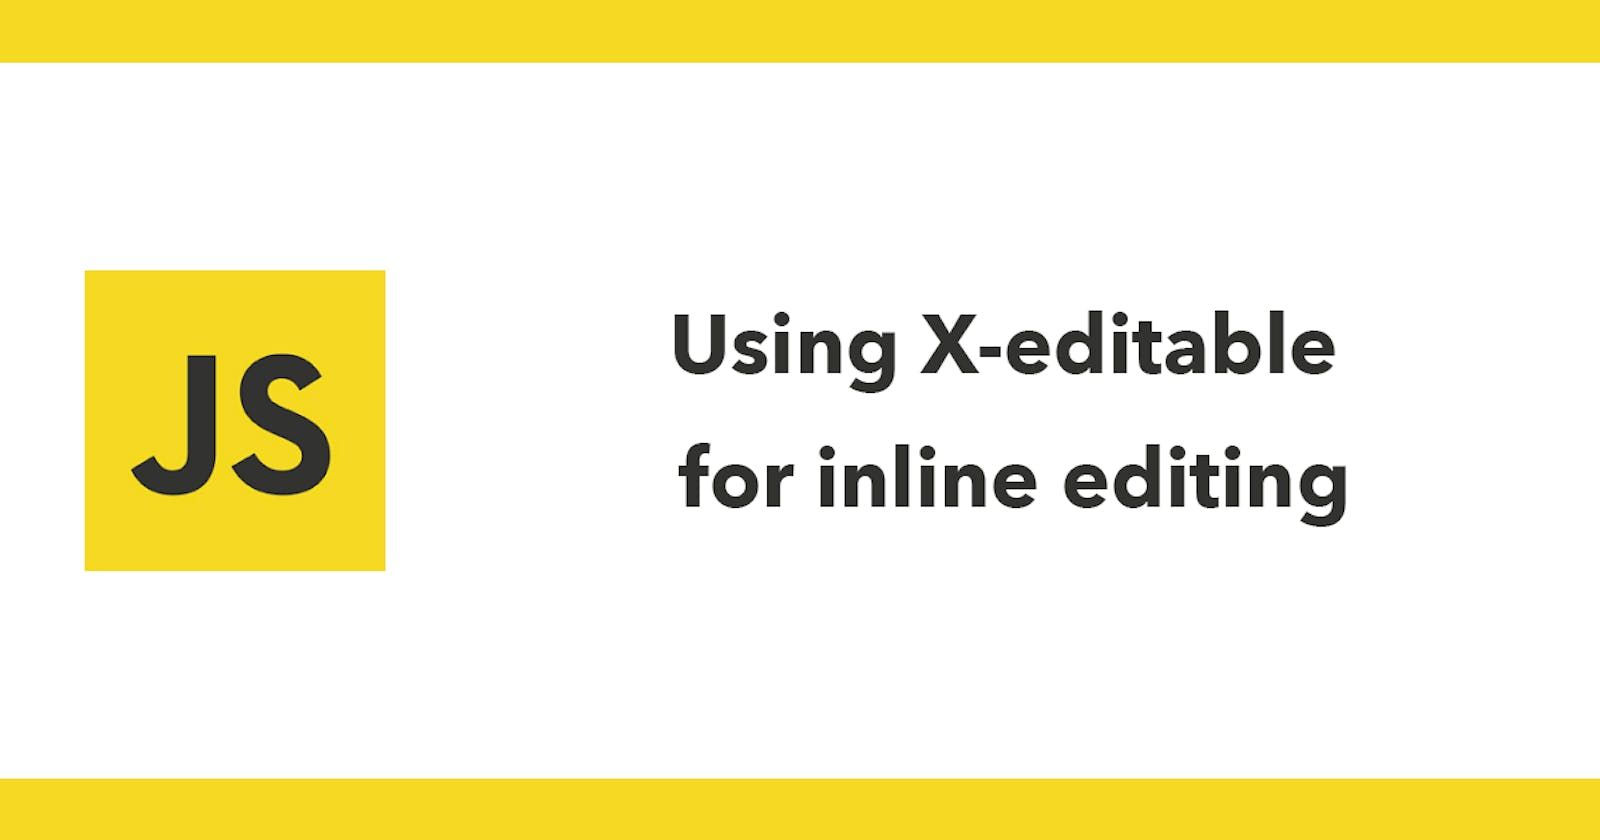 Using X-editable for inline editing